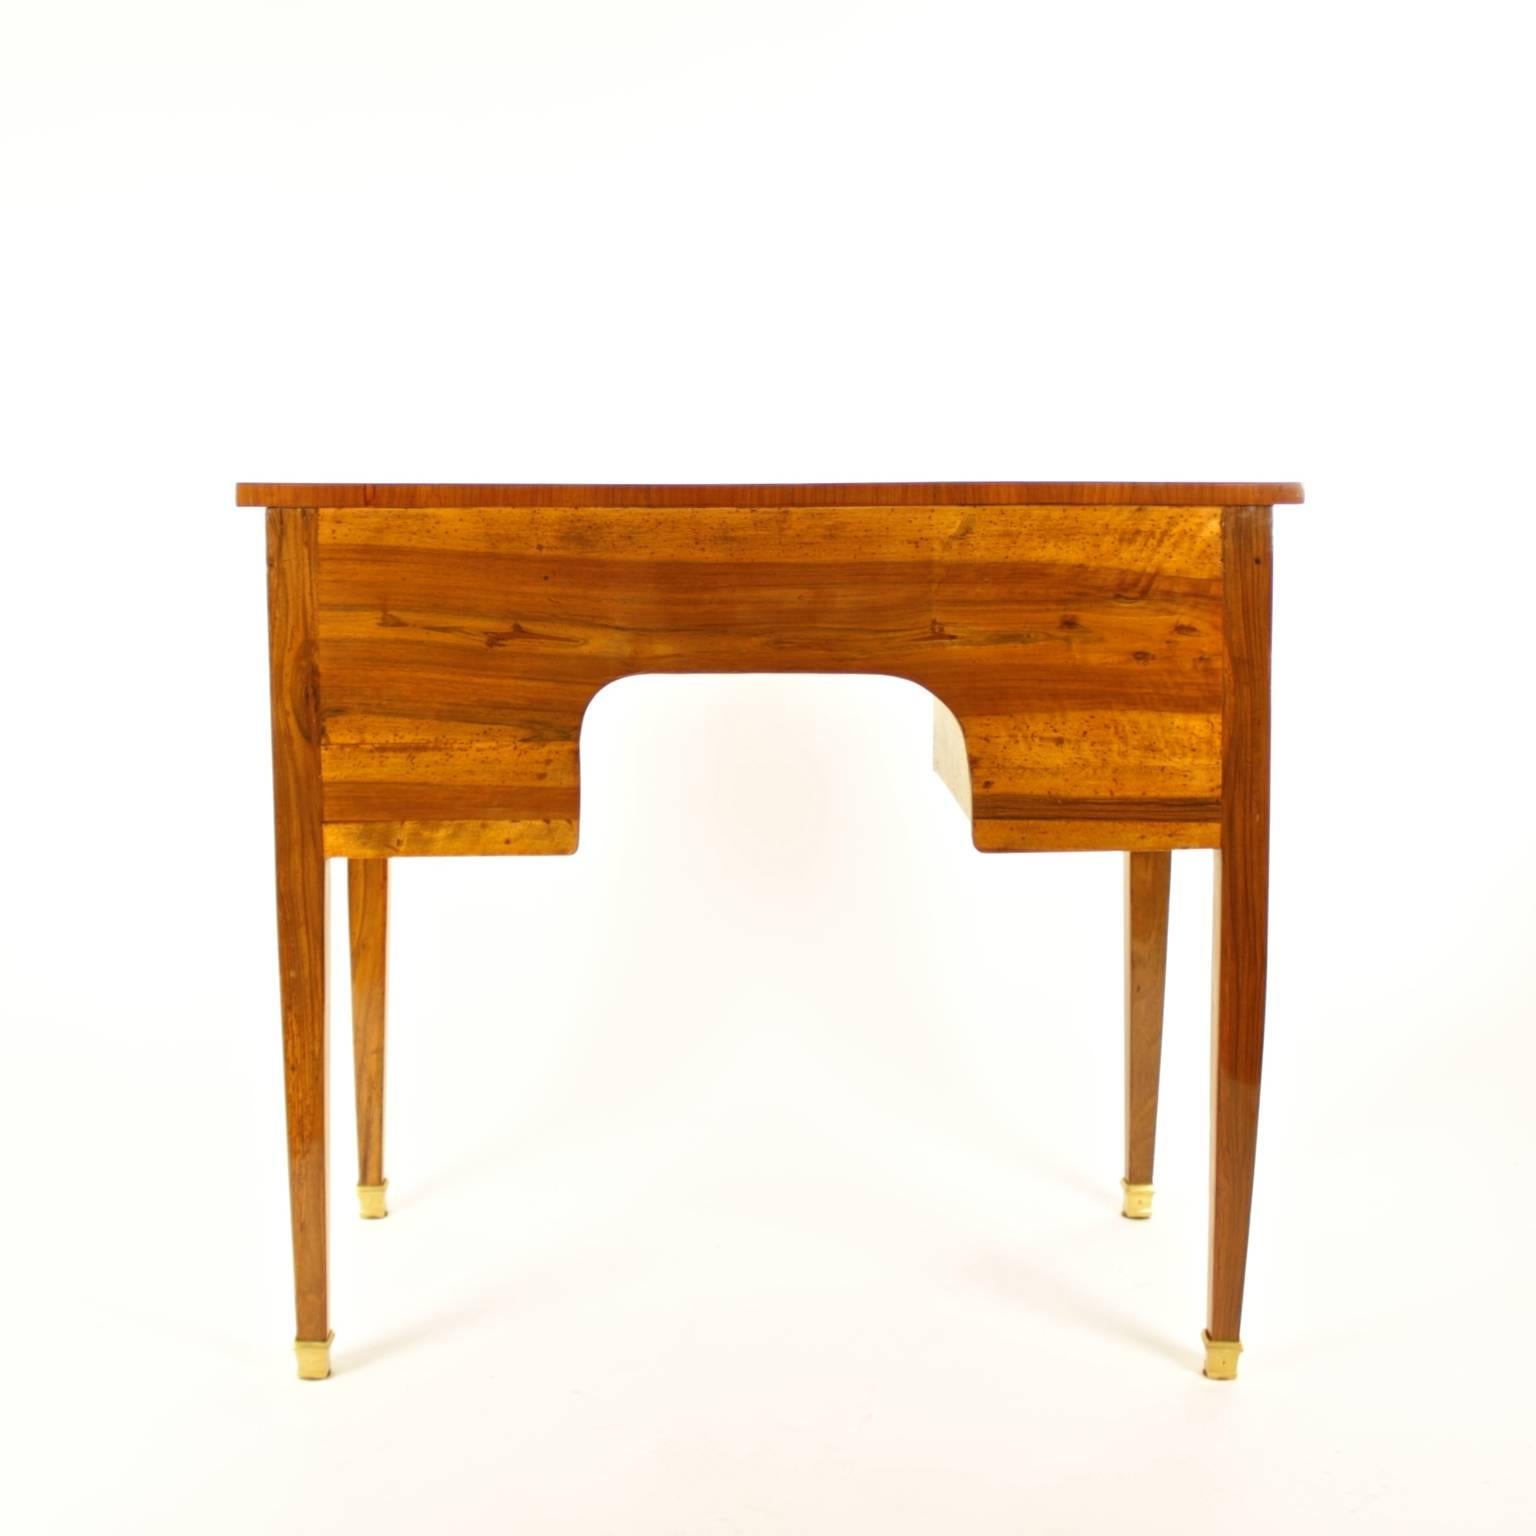 Late 18th Century French Marquetry Desk, in the manner of J.Birckle 1734-1803 3